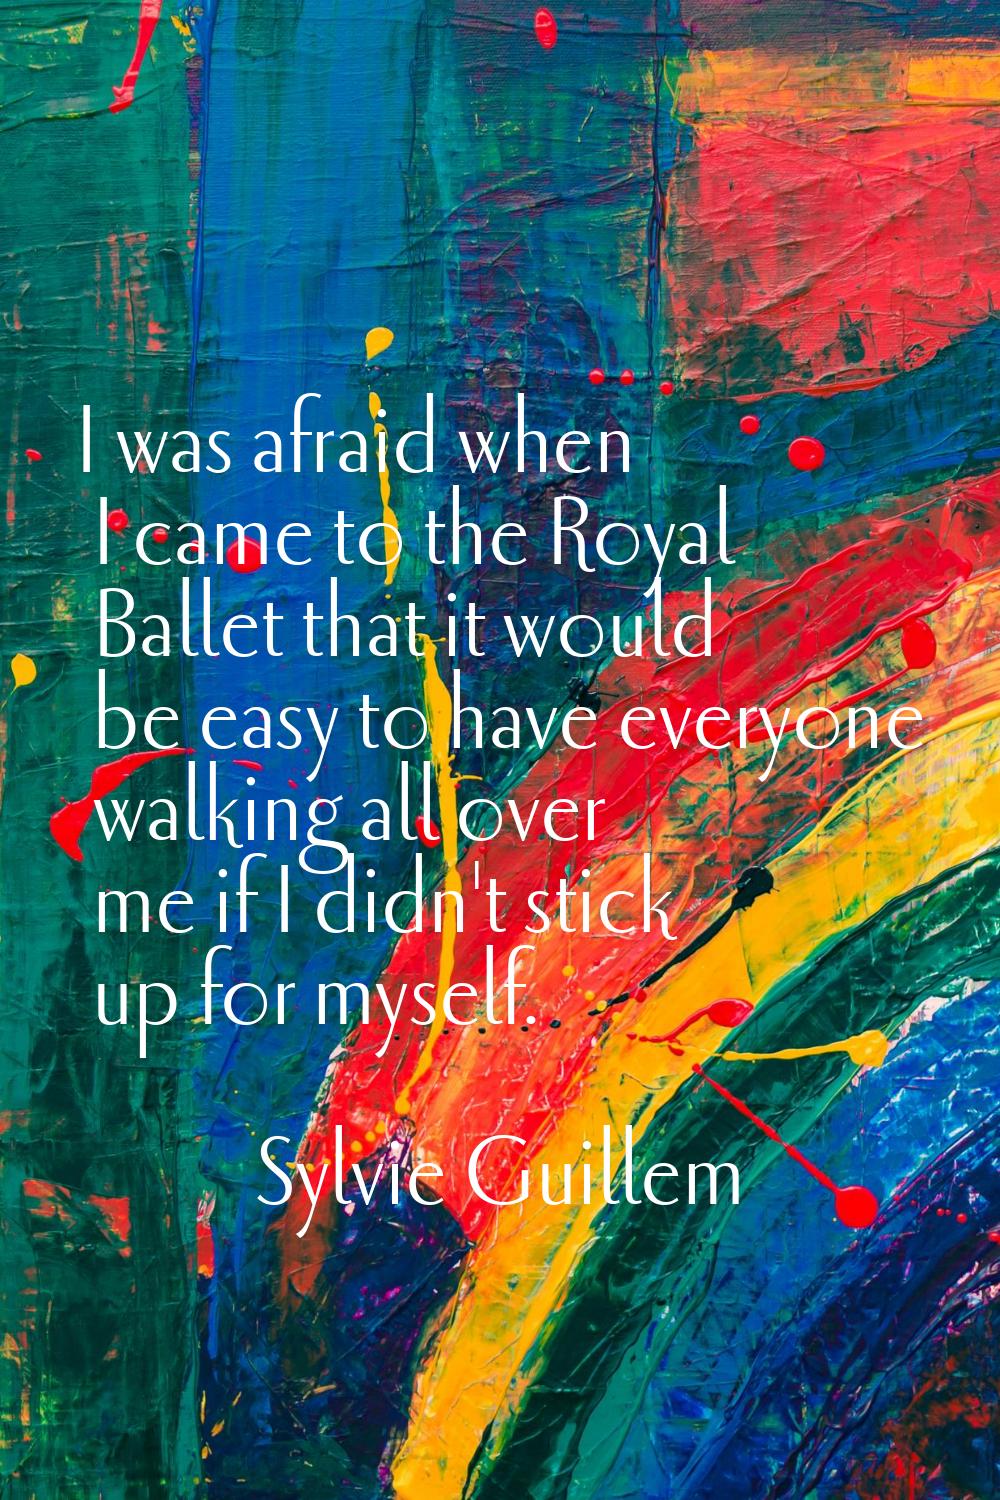 I was afraid when I came to the Royal Ballet that it would be easy to have everyone walking all ove